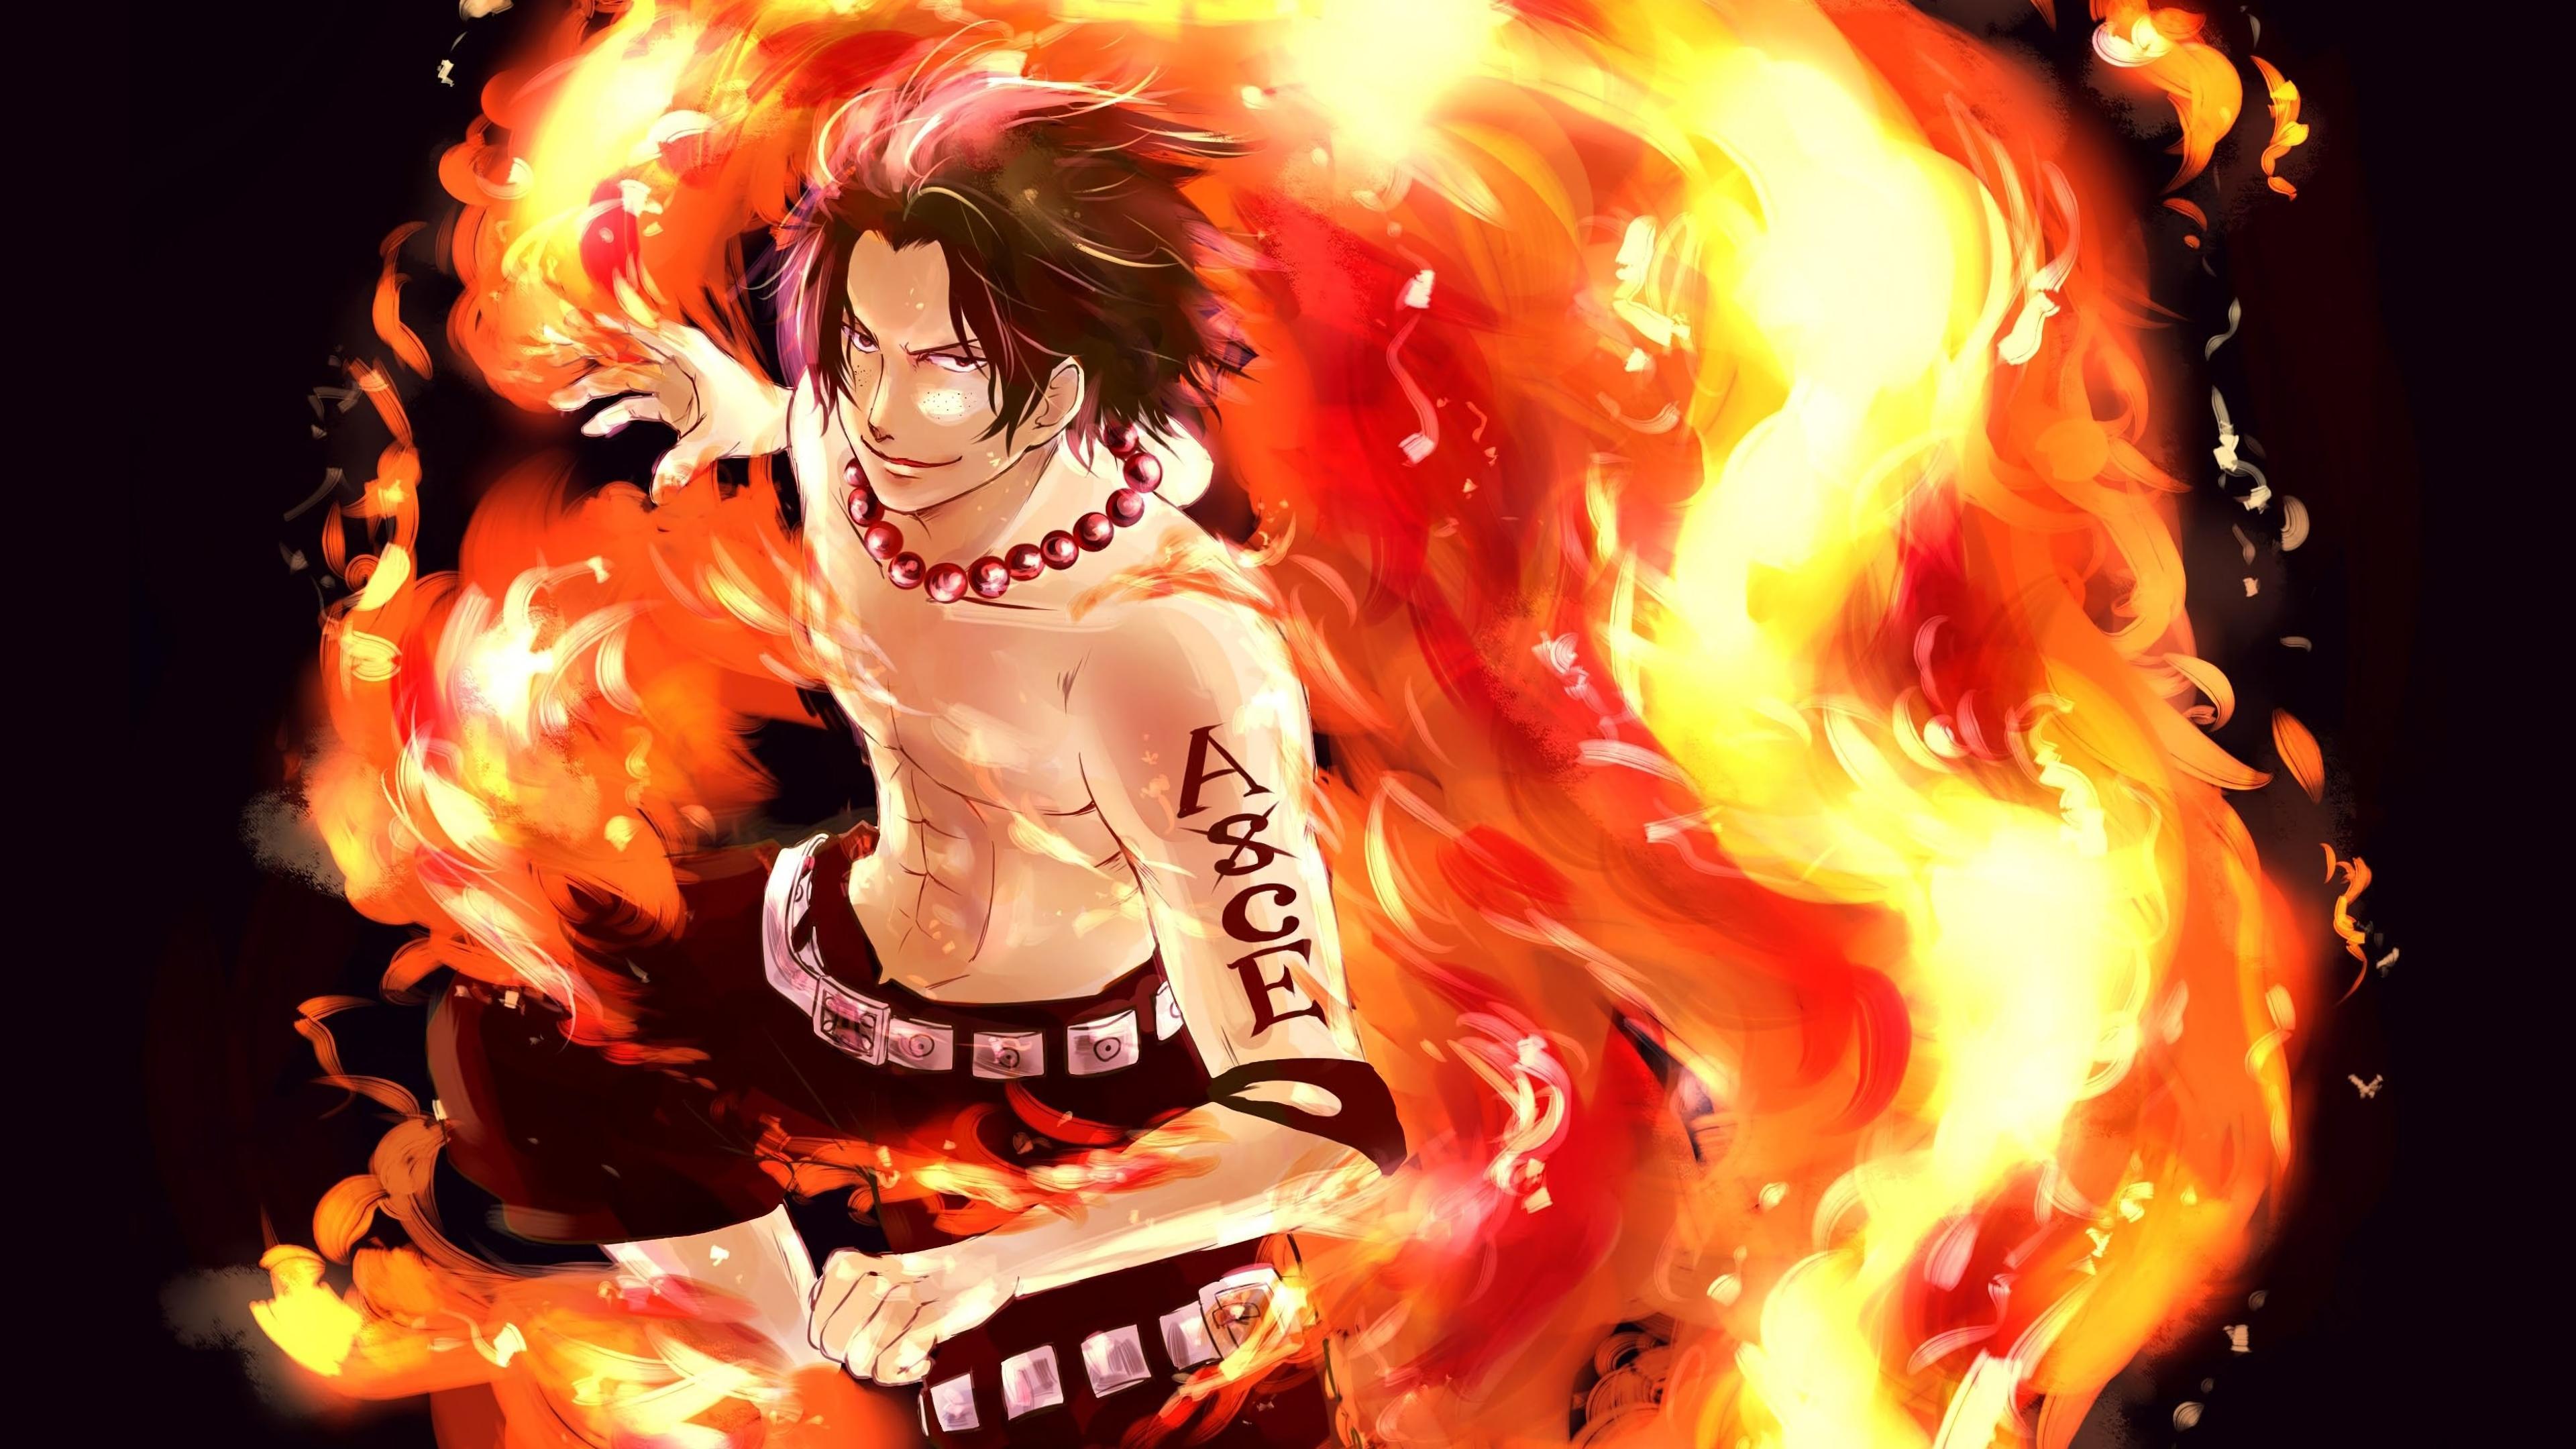 3840 x 2160 · jpeg - One Piece Portgas D Ace, HD Anime, 4k Wallpapers, Images, Backgrounds ...